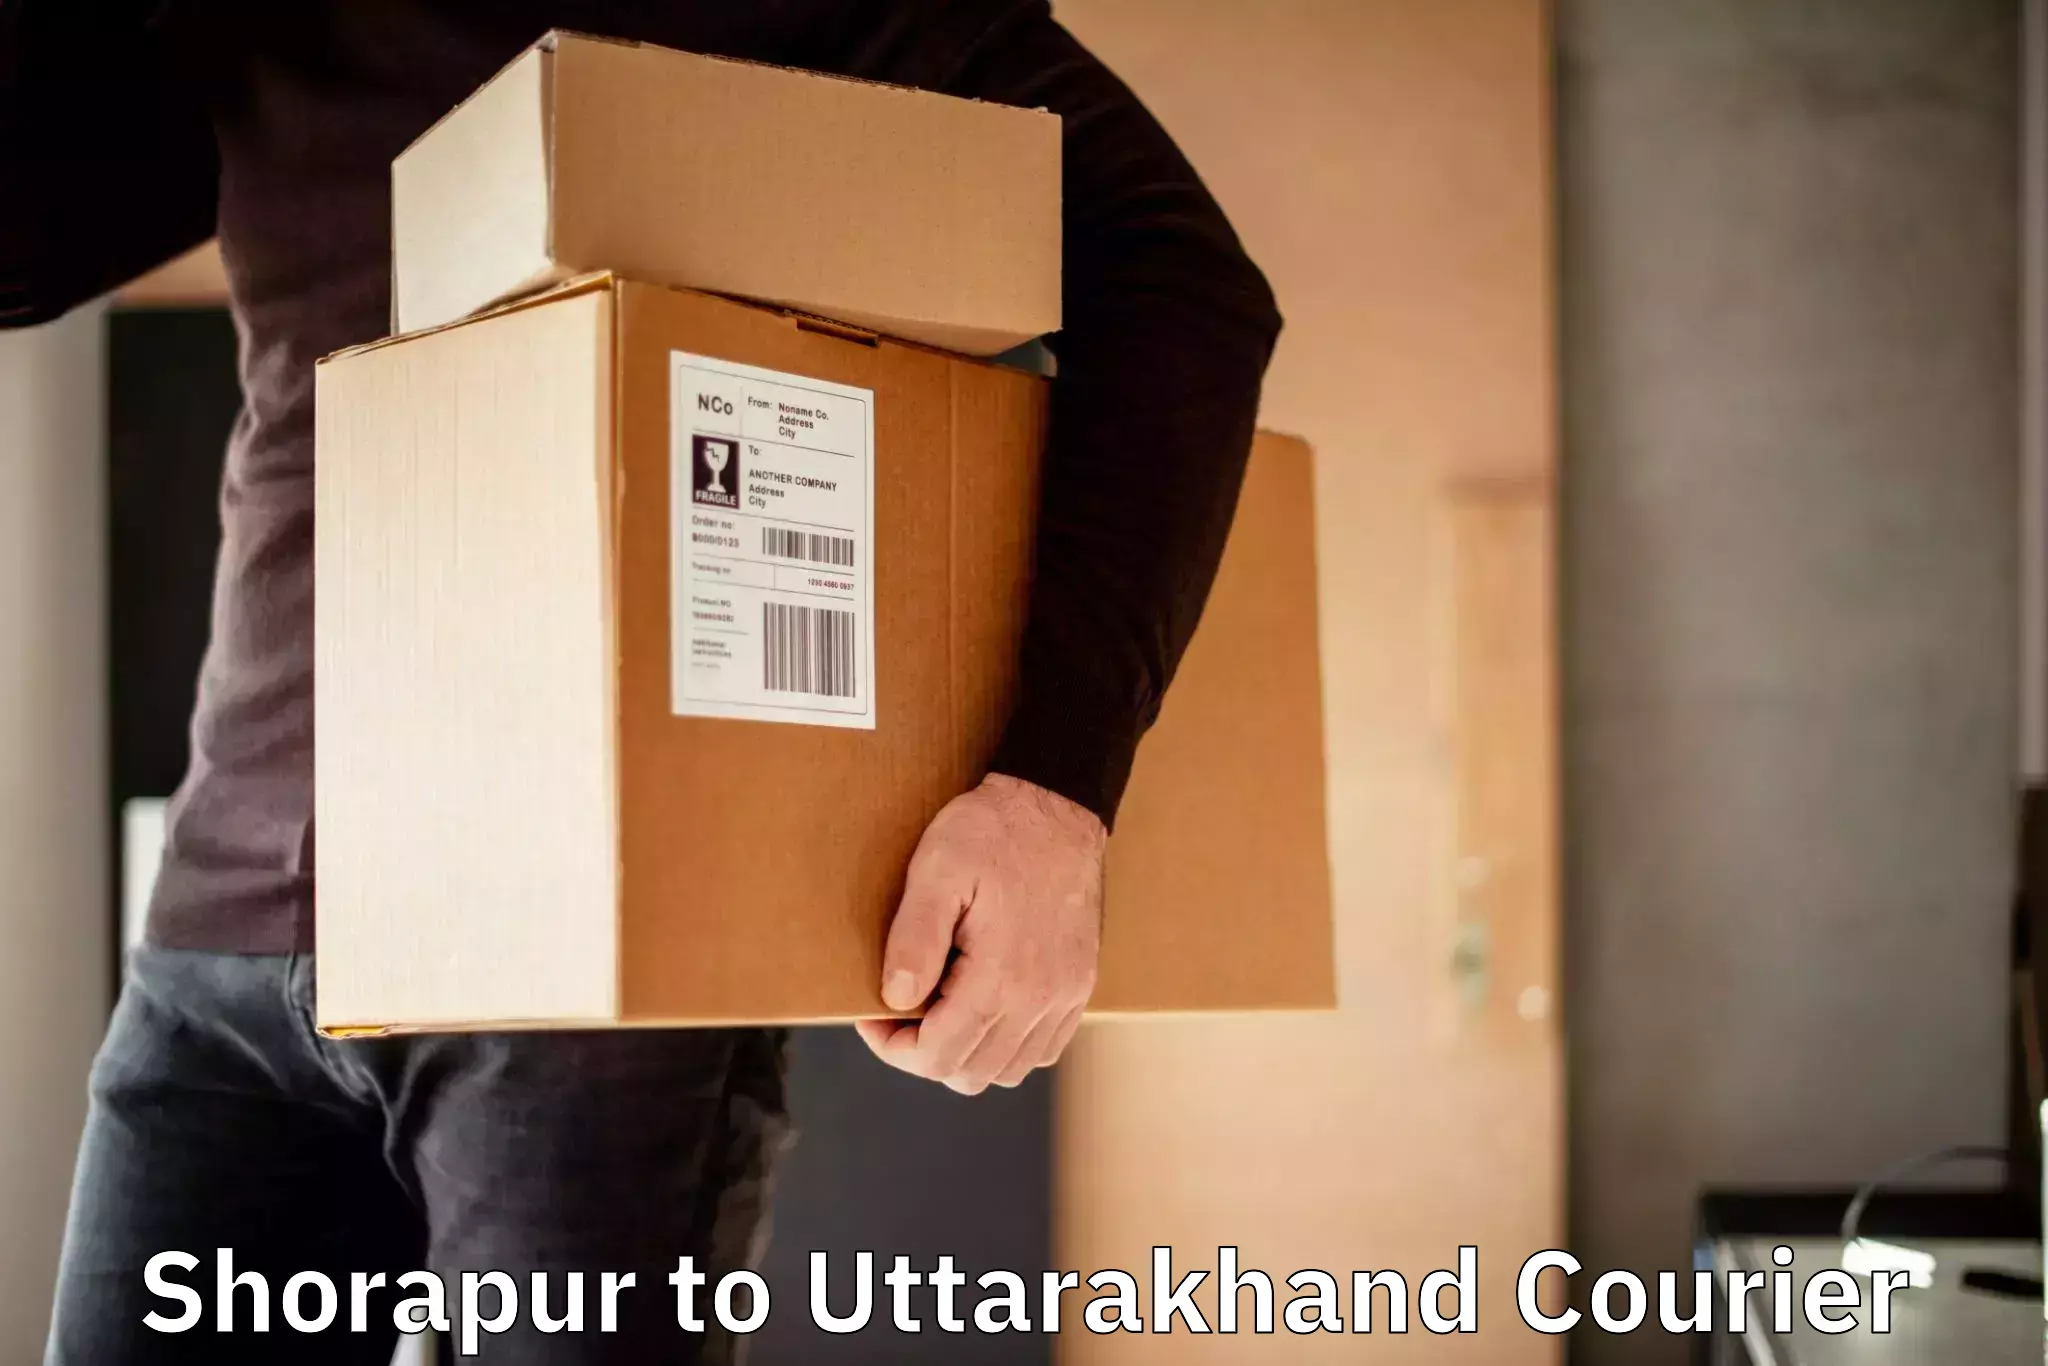 Automated parcel services Shorapur to Nainital